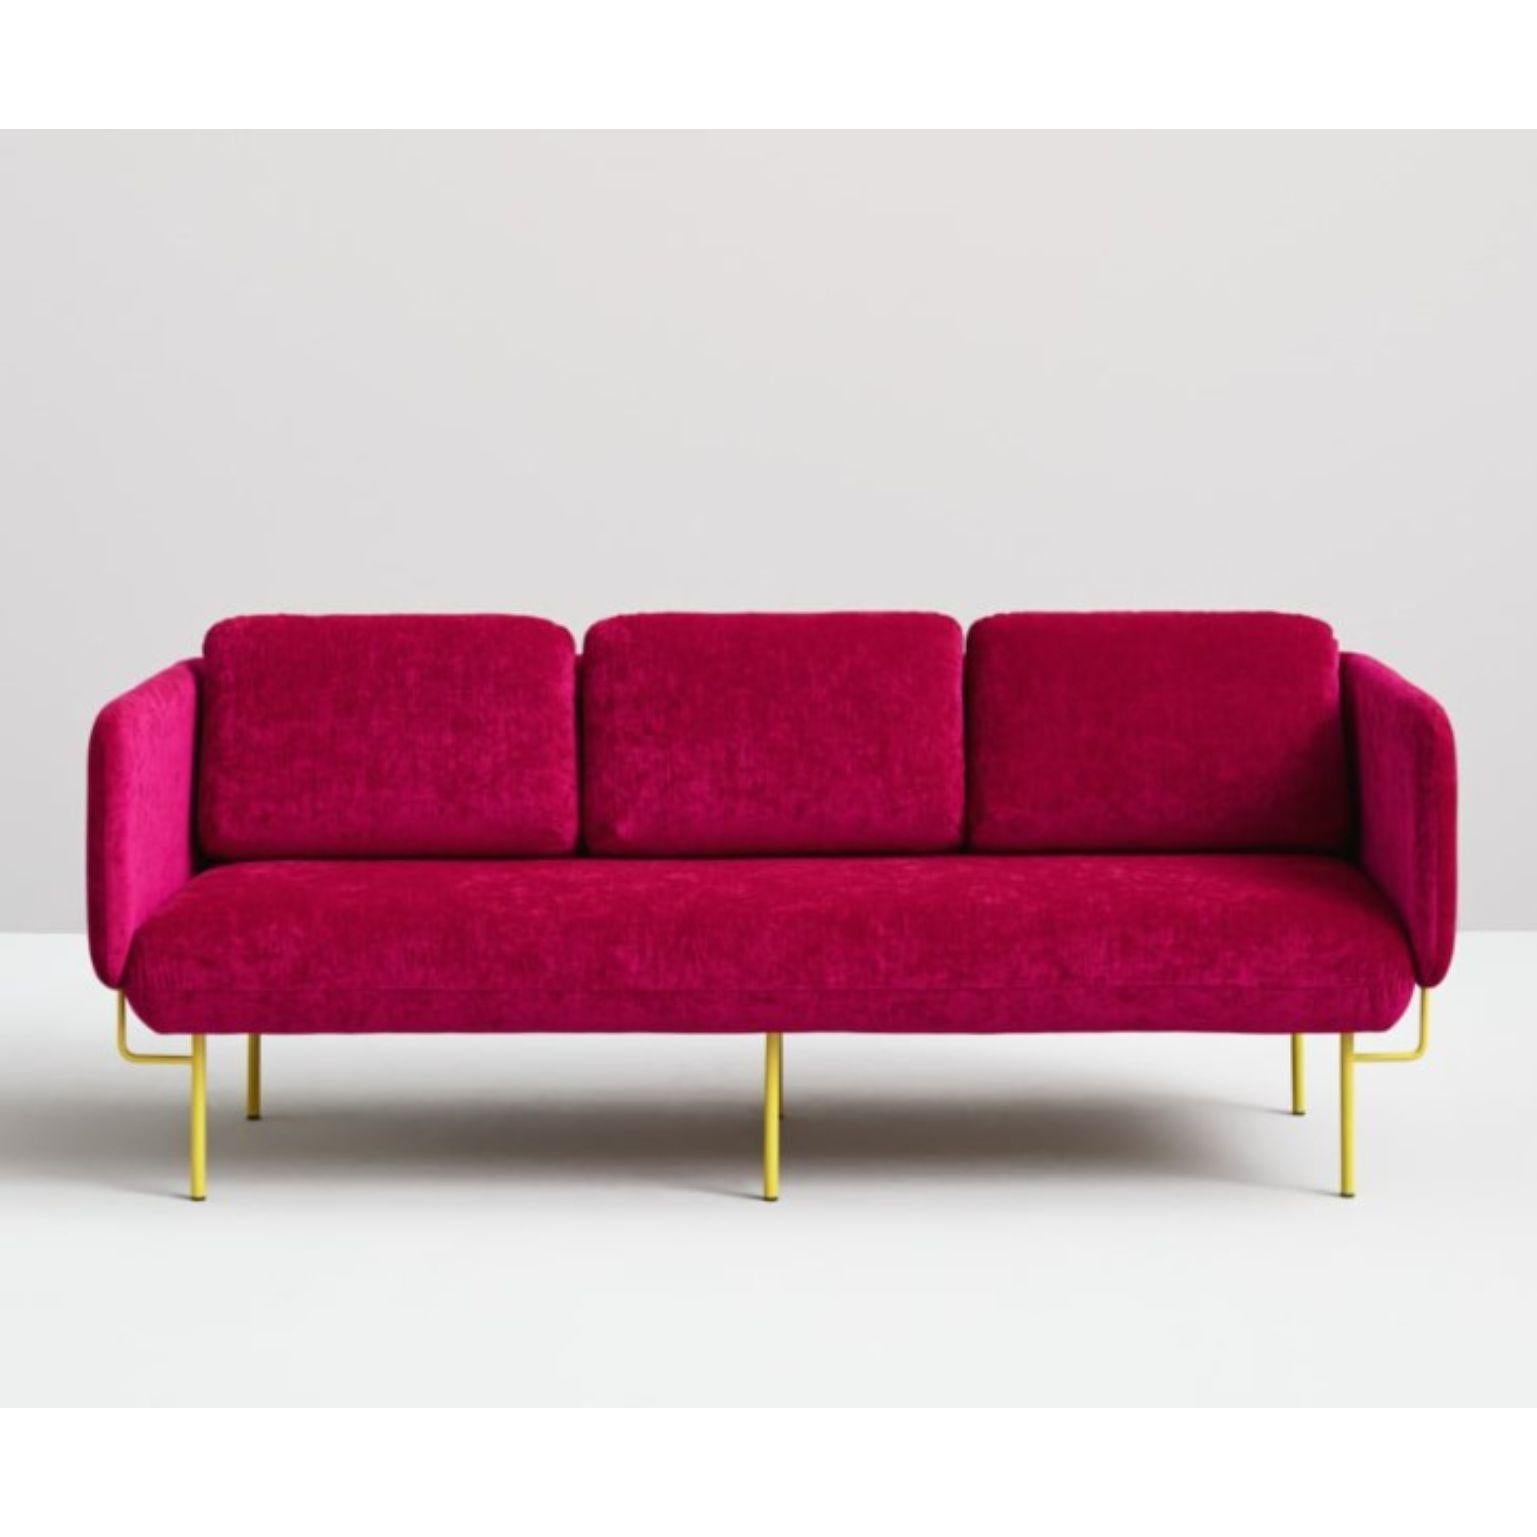 Pink Alce sofa, small by Pepe Albargues
Dimensions: W166, D88, H82, seat45 (2 Seaters)
Materials: Iron structure and MDF board
Painted or chromed legs
Foam CMHR (high resilience and flame retardant) for all our cushion filling